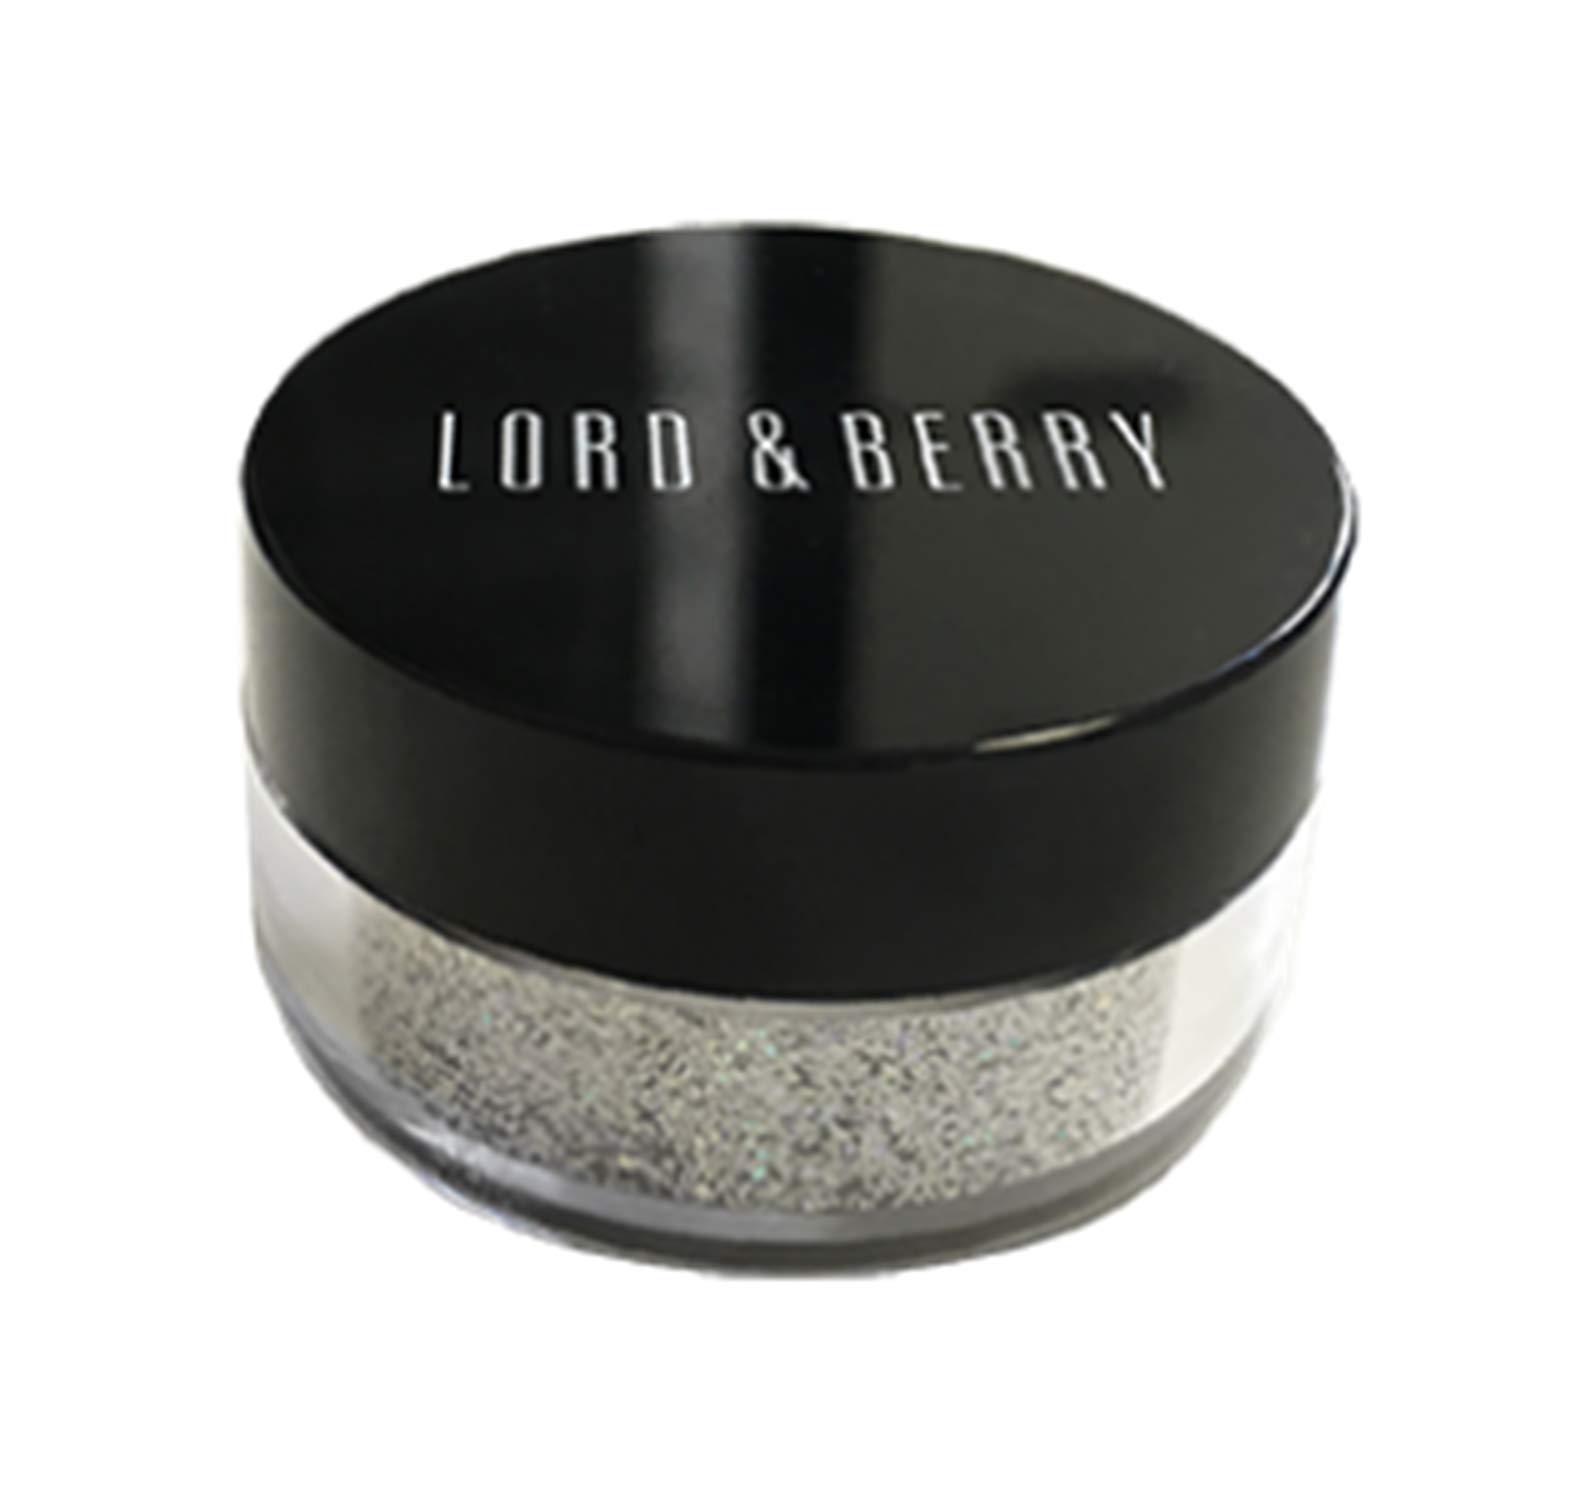 Lord & Berry GLITTER Professional Face and Body Makeup Glitter With High Level Sparkle & Scintillating Effect